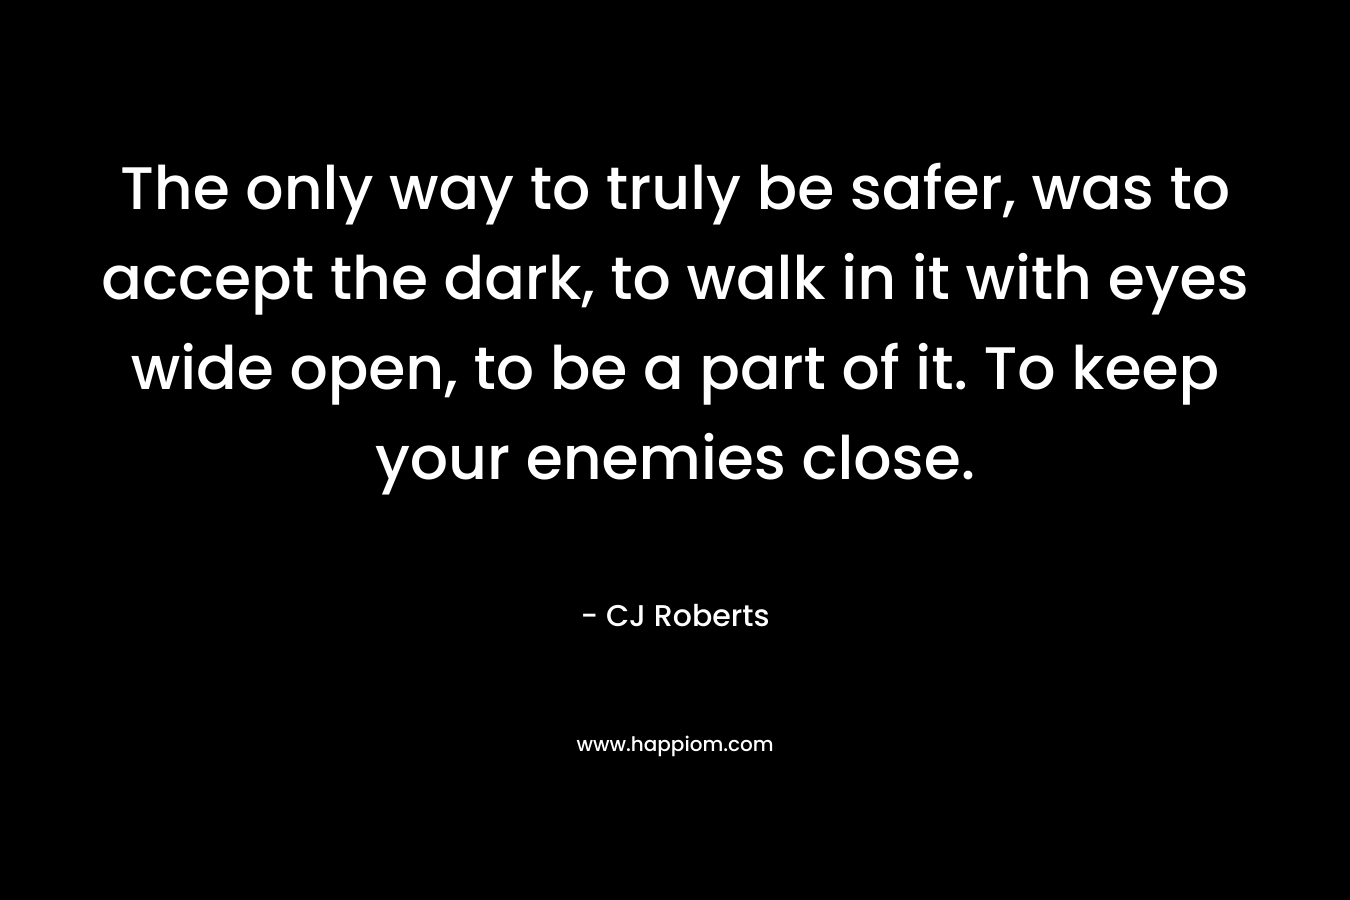 The only way to truly be safer, was to accept the dark, to walk in it with eyes wide open, to be a part of it. To keep your enemies close.